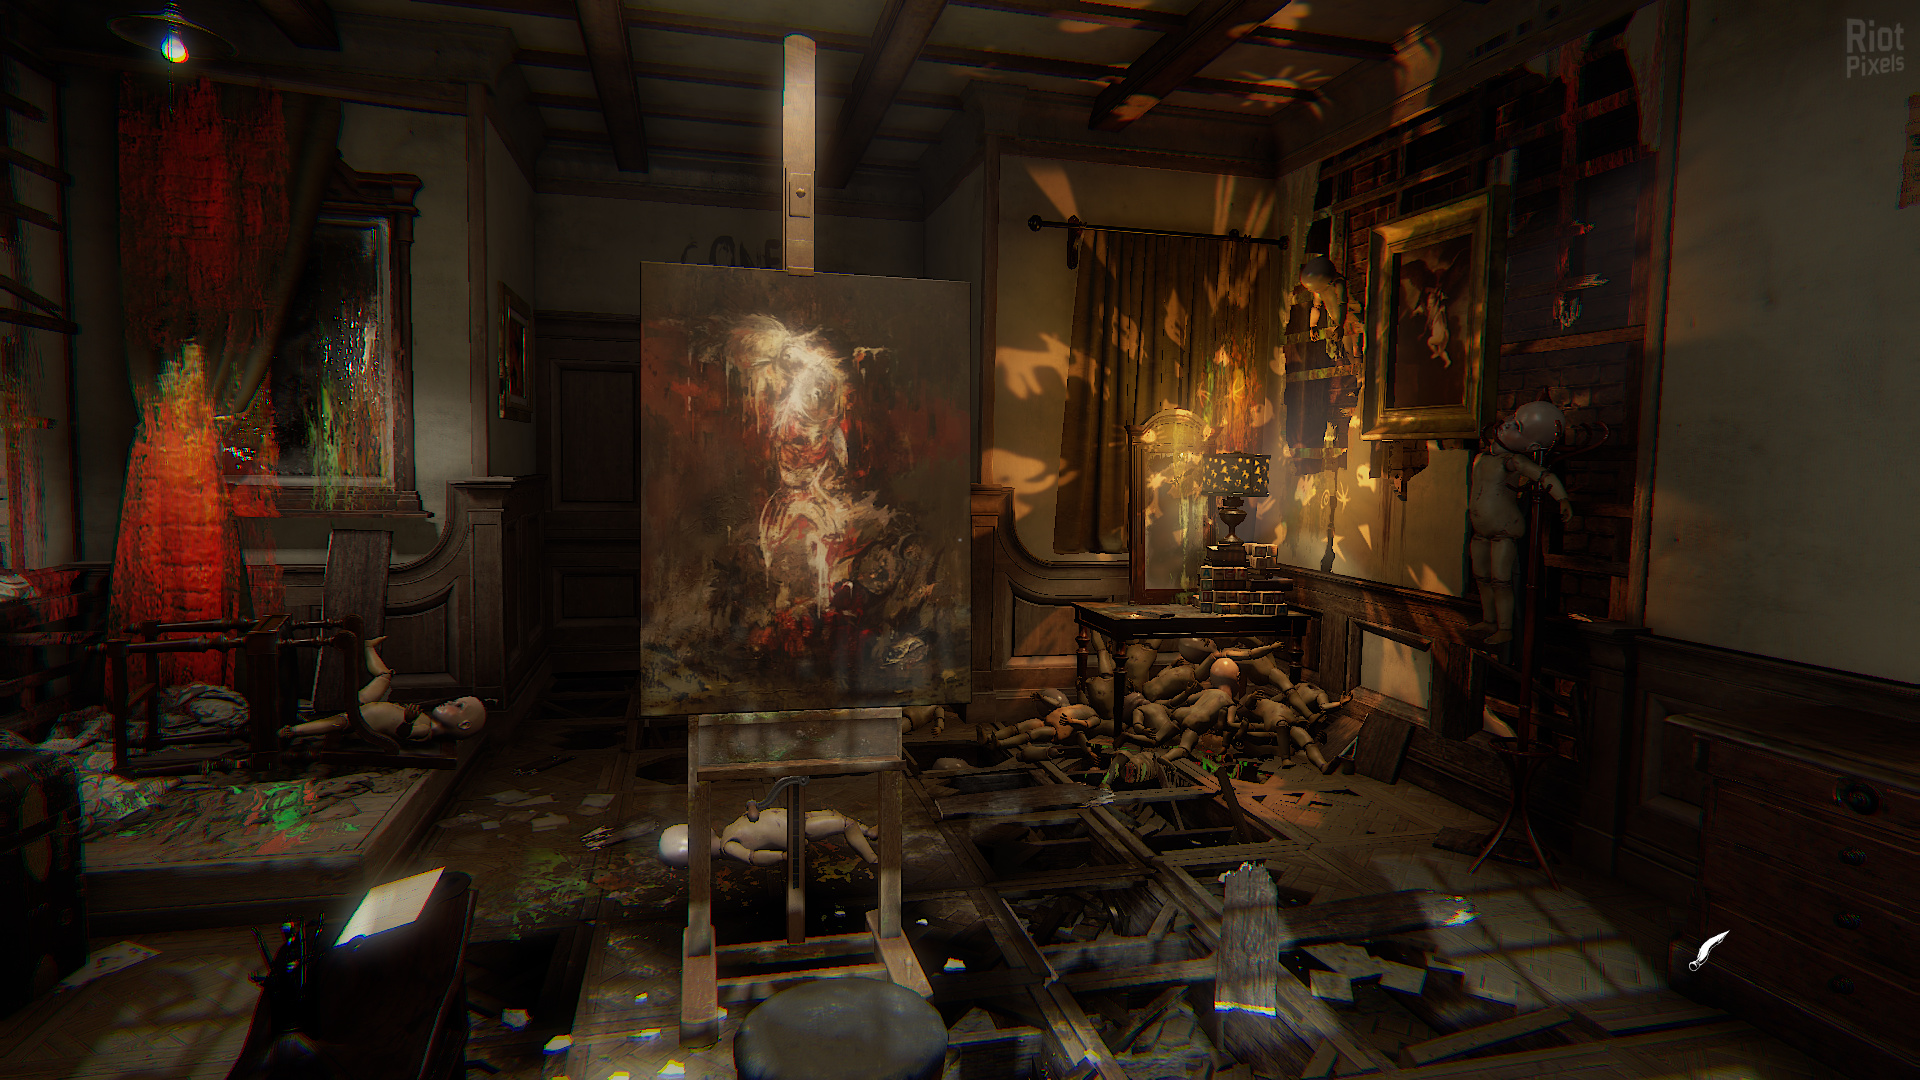 layers of fear download